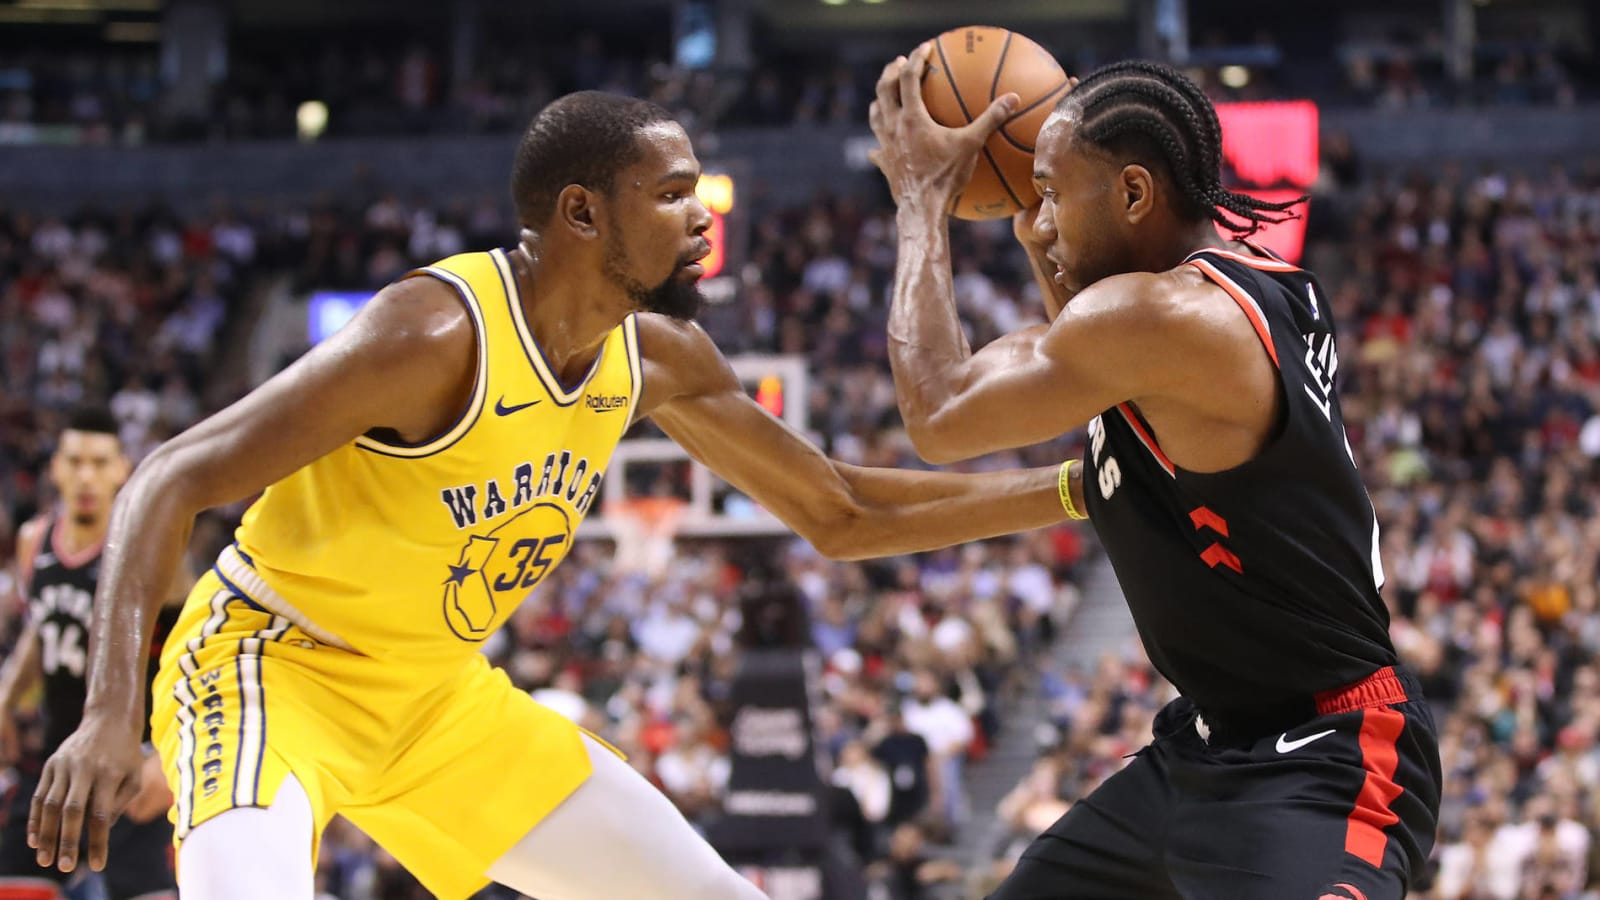 Why KD, Kawhi, not MVP candidates Giannis, Harden, are NBA's best